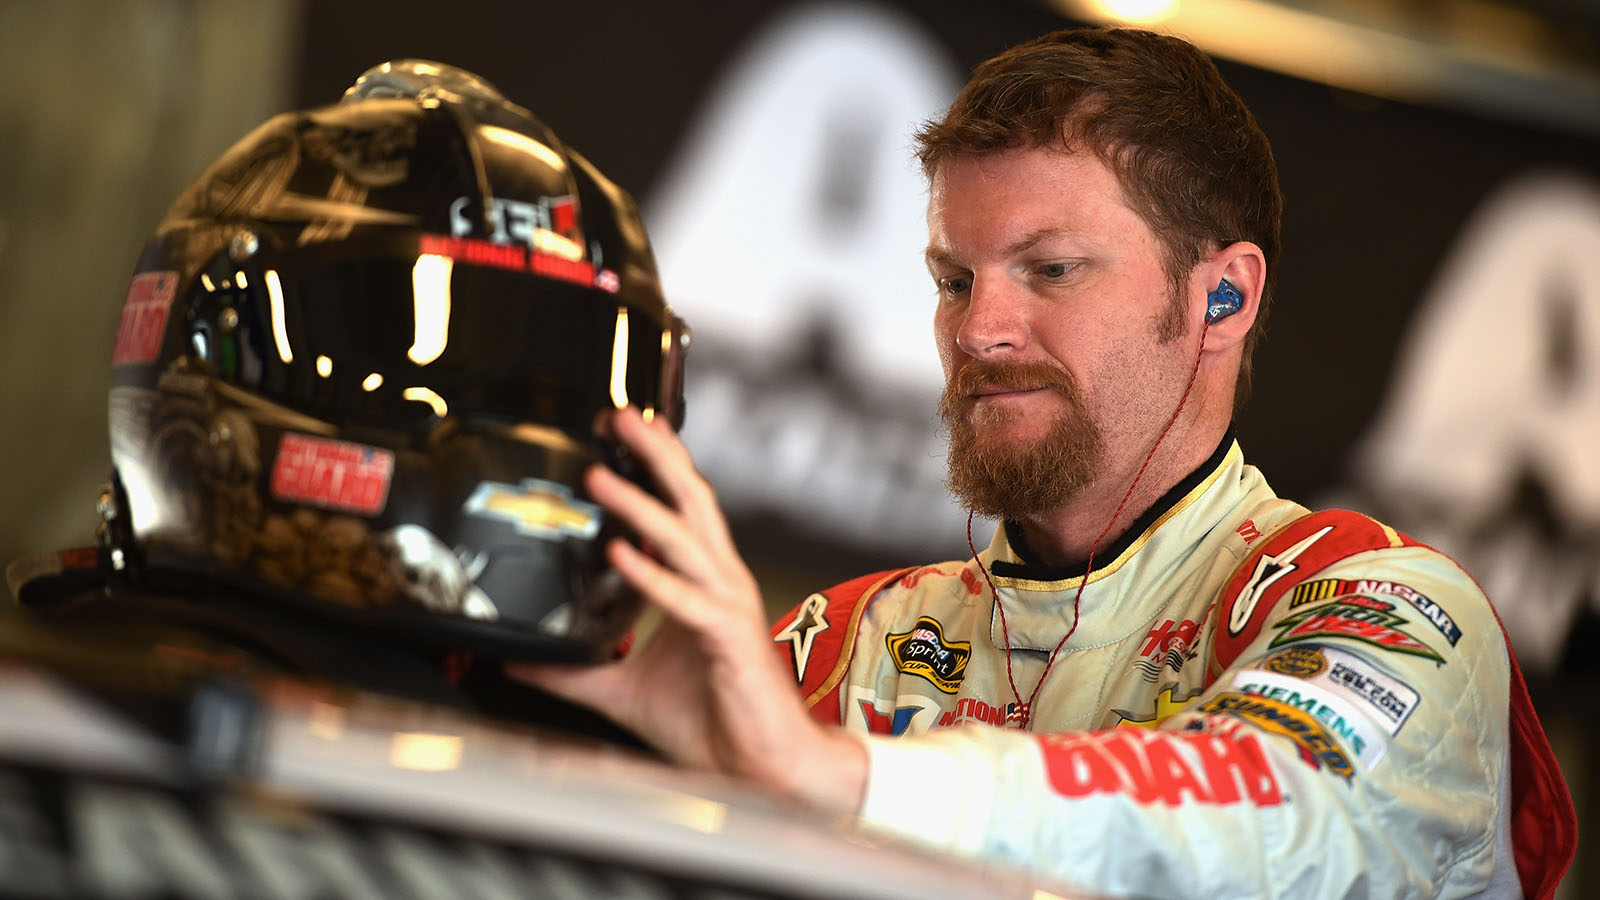 Dale Earnhardt Jr. looks to Pocono after fighting for ninth at Indy